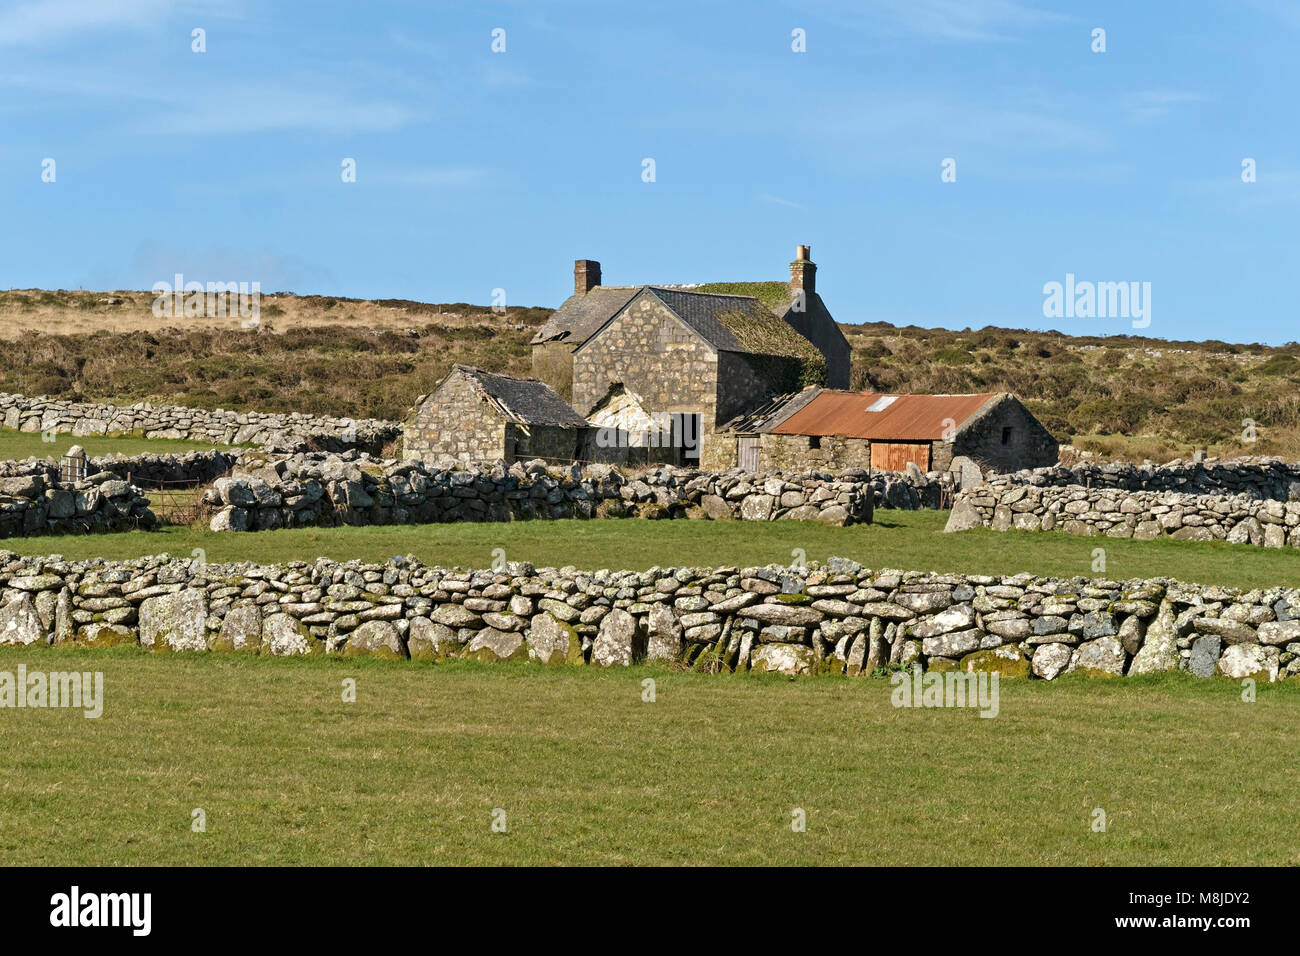 Old deserted Cornish stone farmhouse buildings, green fields and dry-stone walls, Cornwall, England, UK Stock Photo